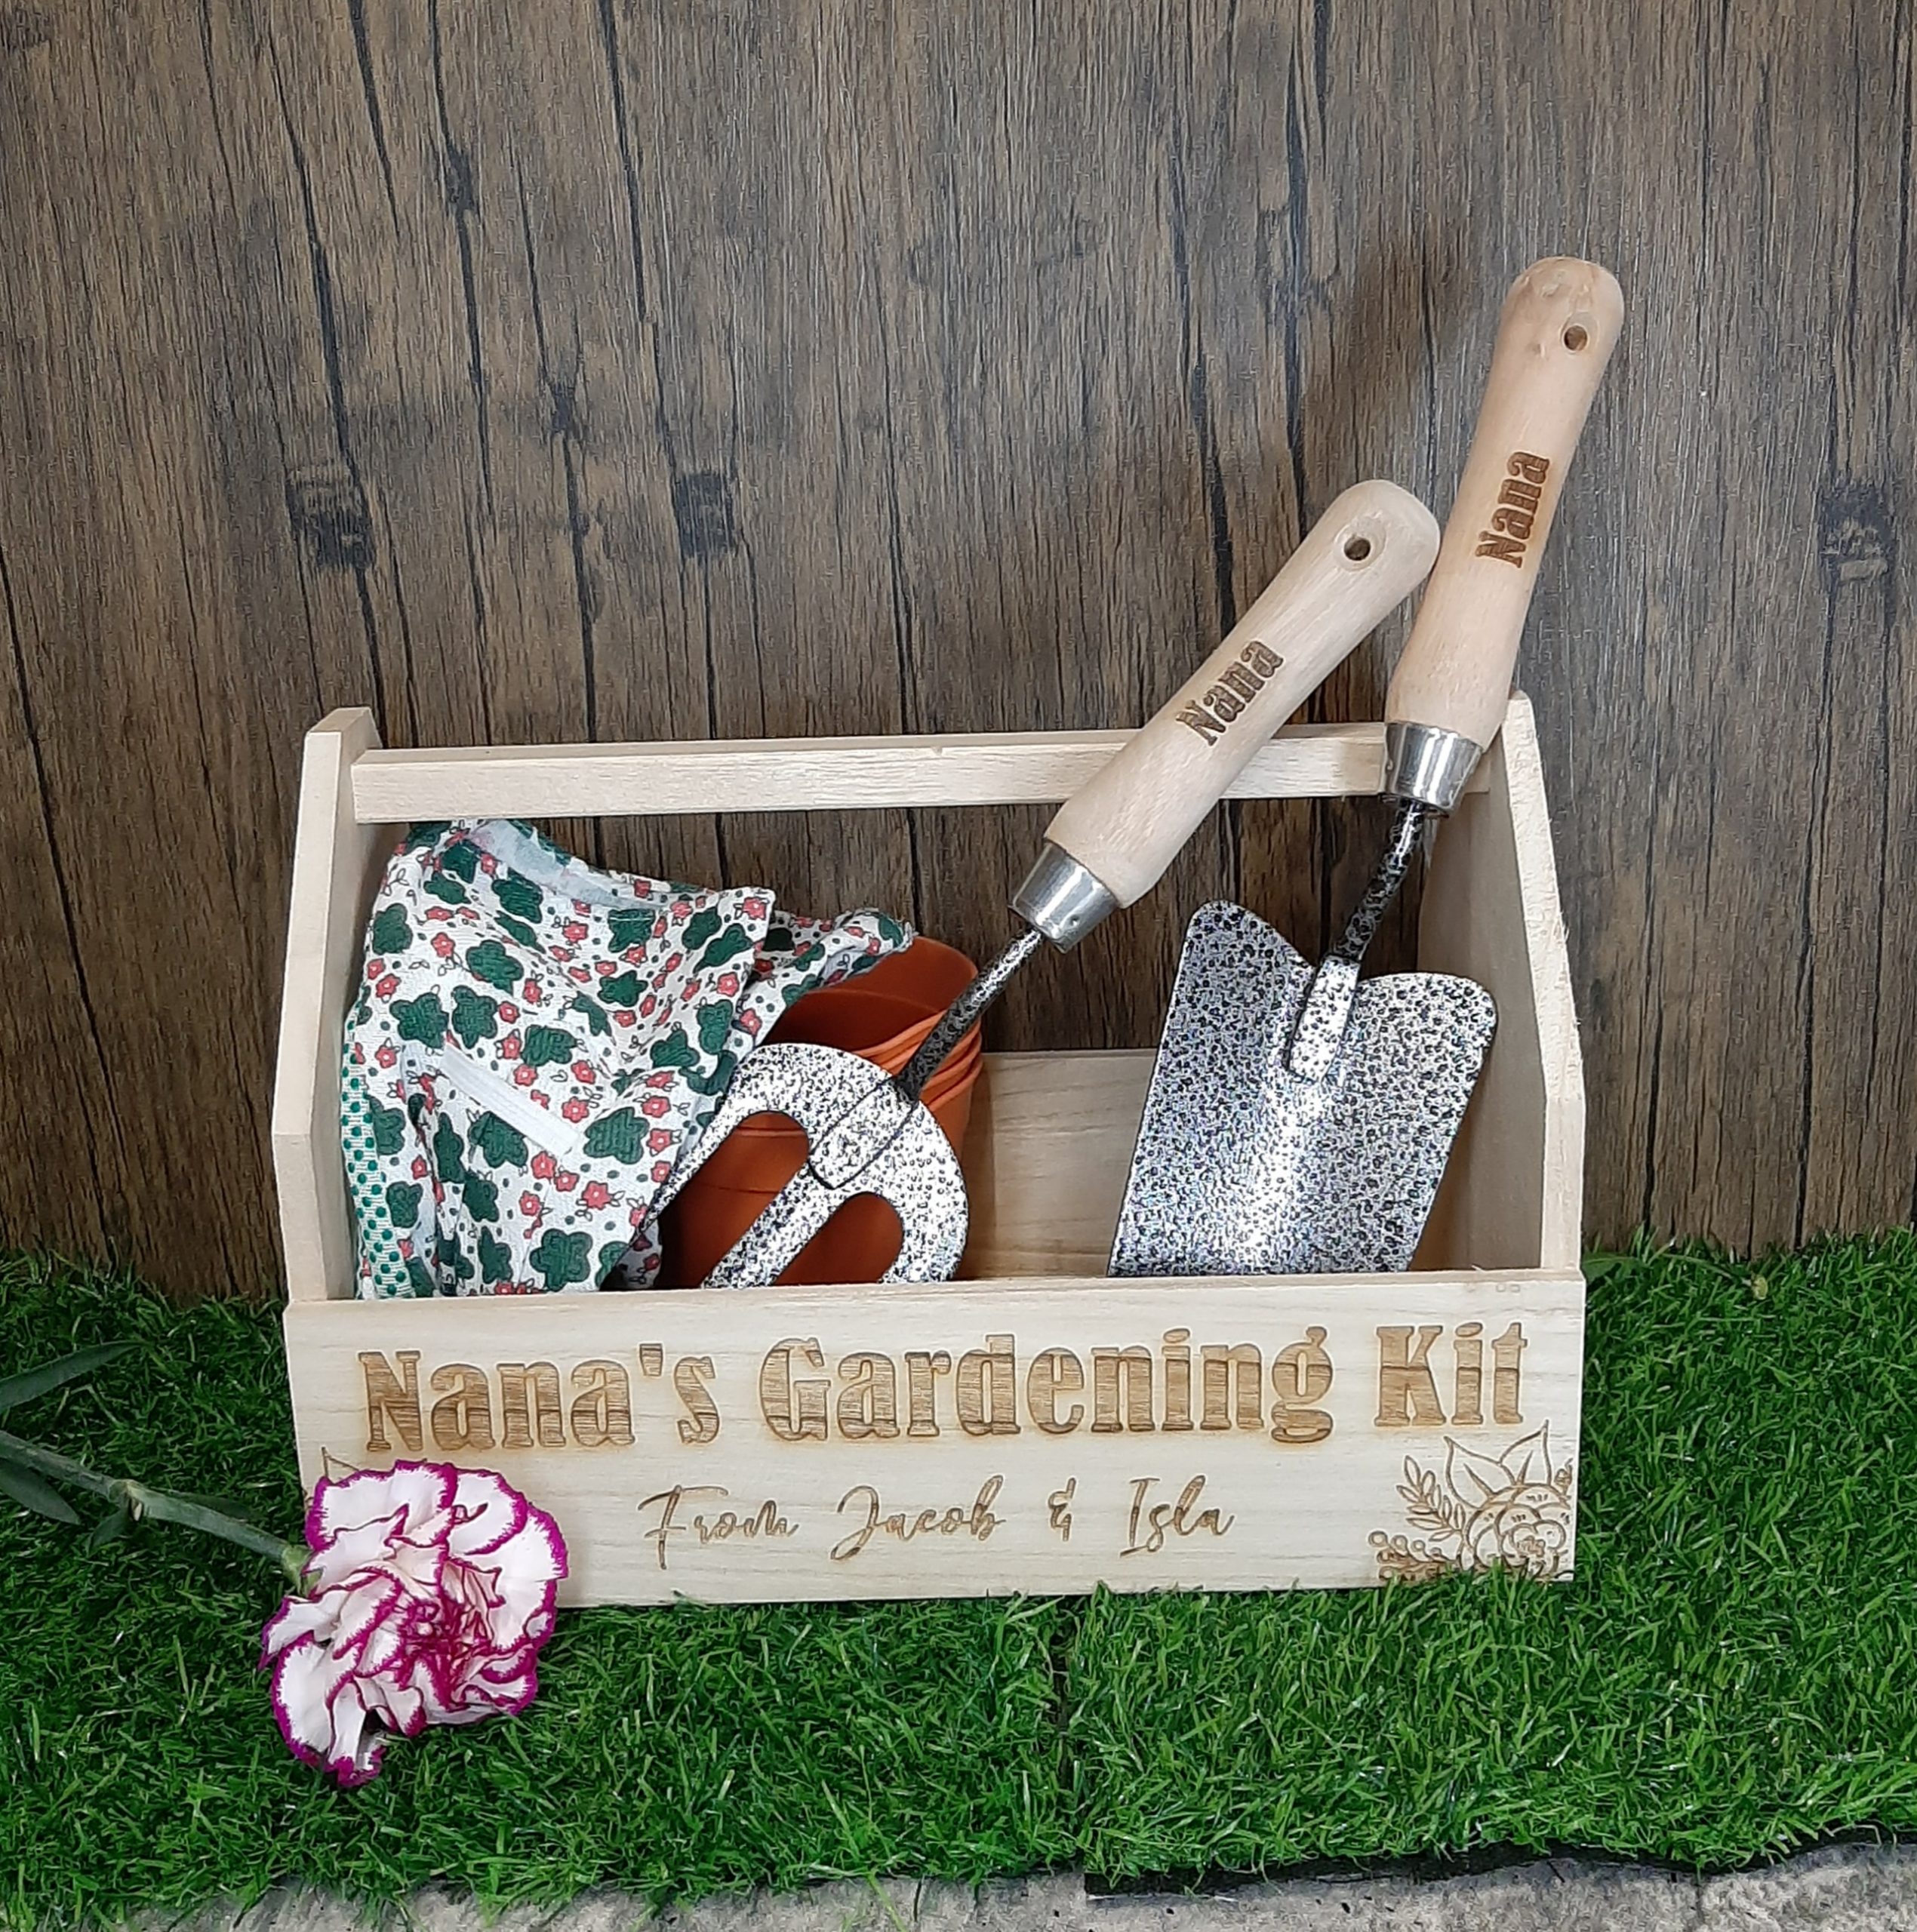 Gardening kit with flower box on grass with personalised box, fork and trowel